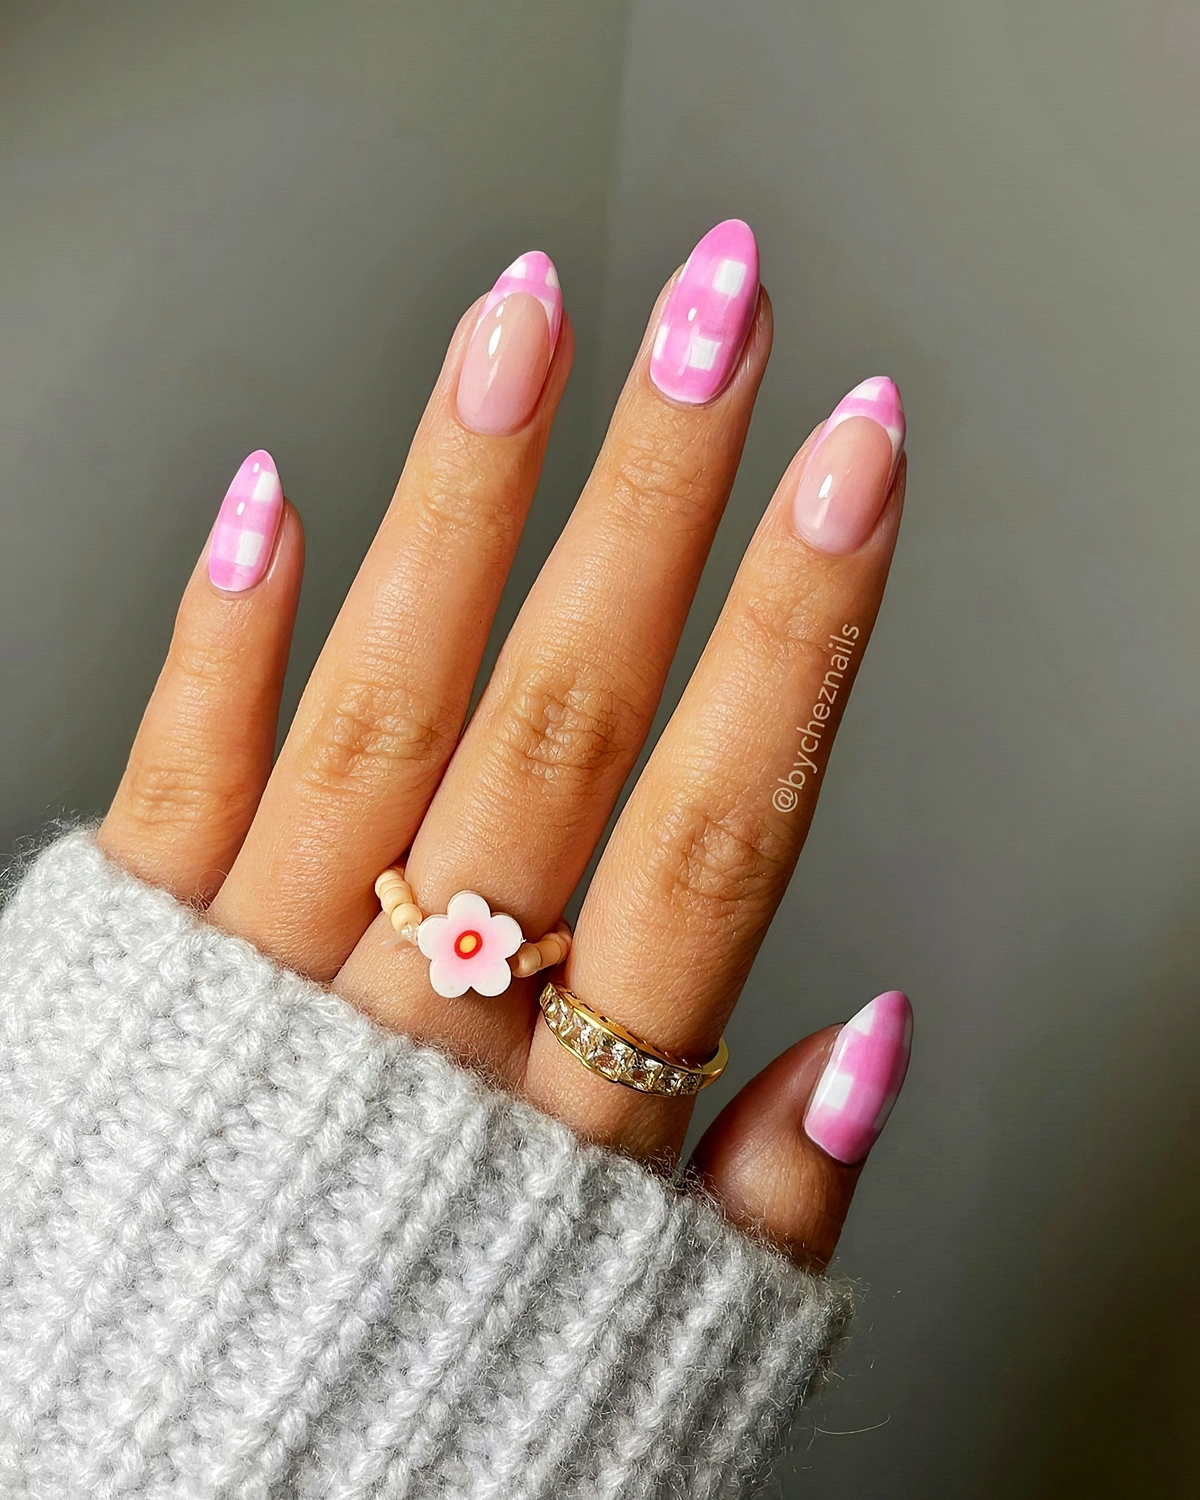 nails rosa und weiss lange naegel picknickdecke muster 